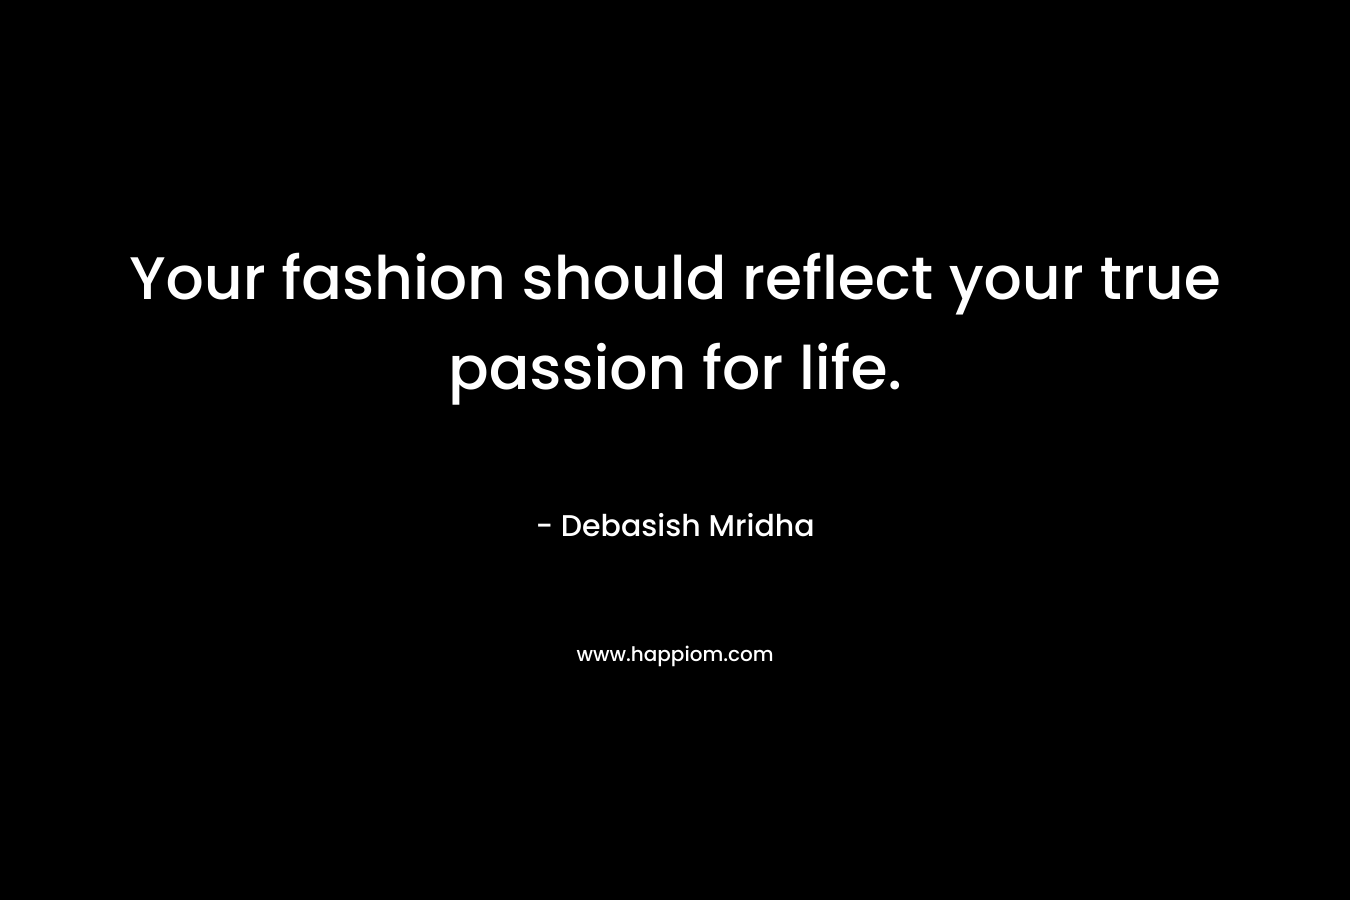 Your fashion should reflect your true passion for life.